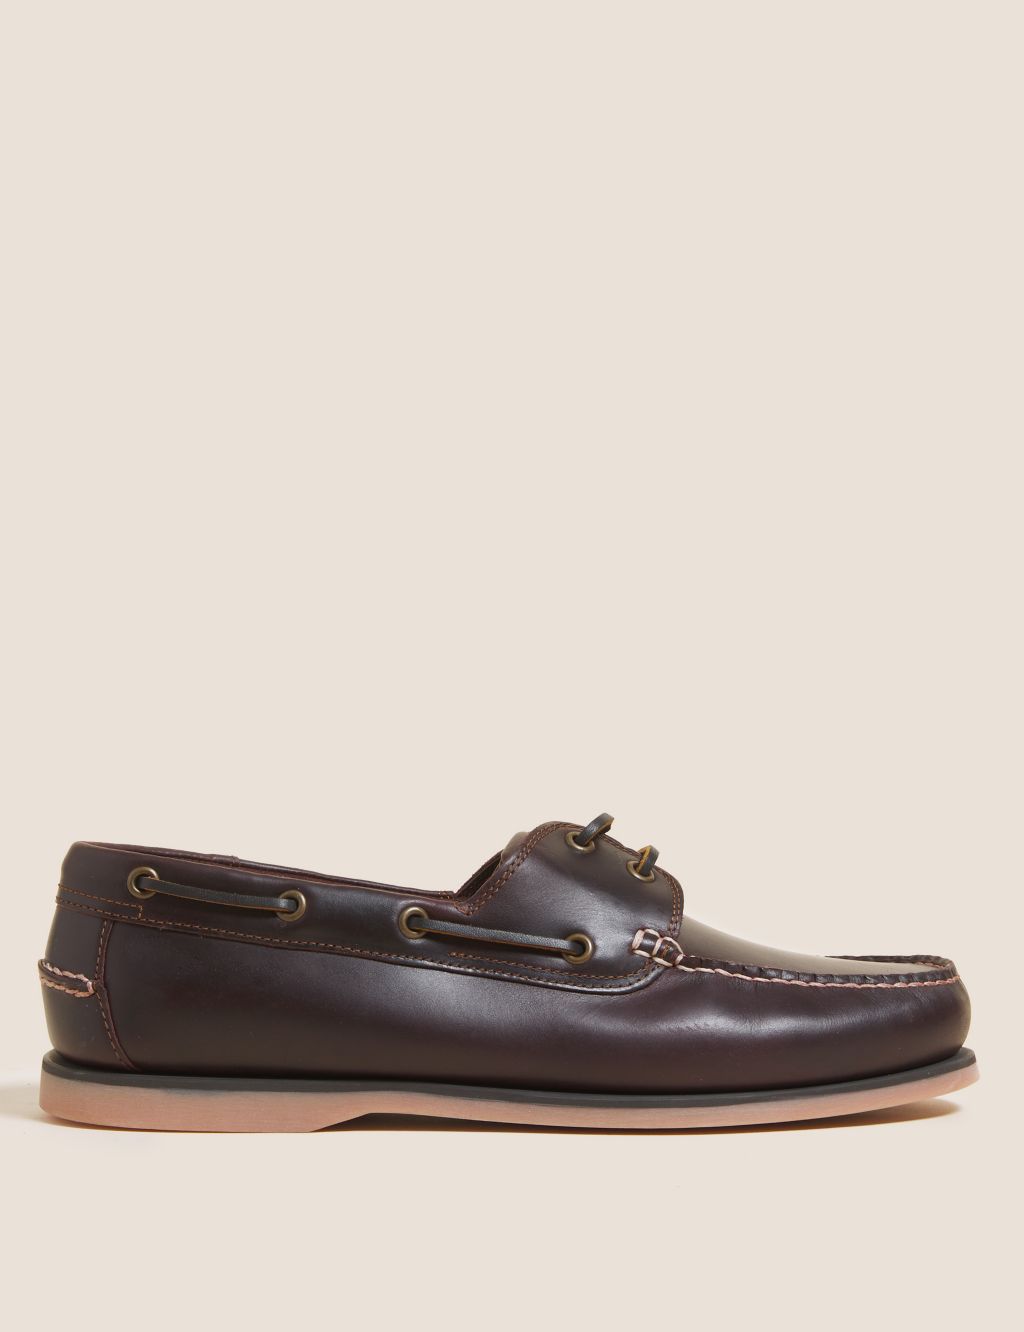 Wide Fit Leather Boat Shoes image 4